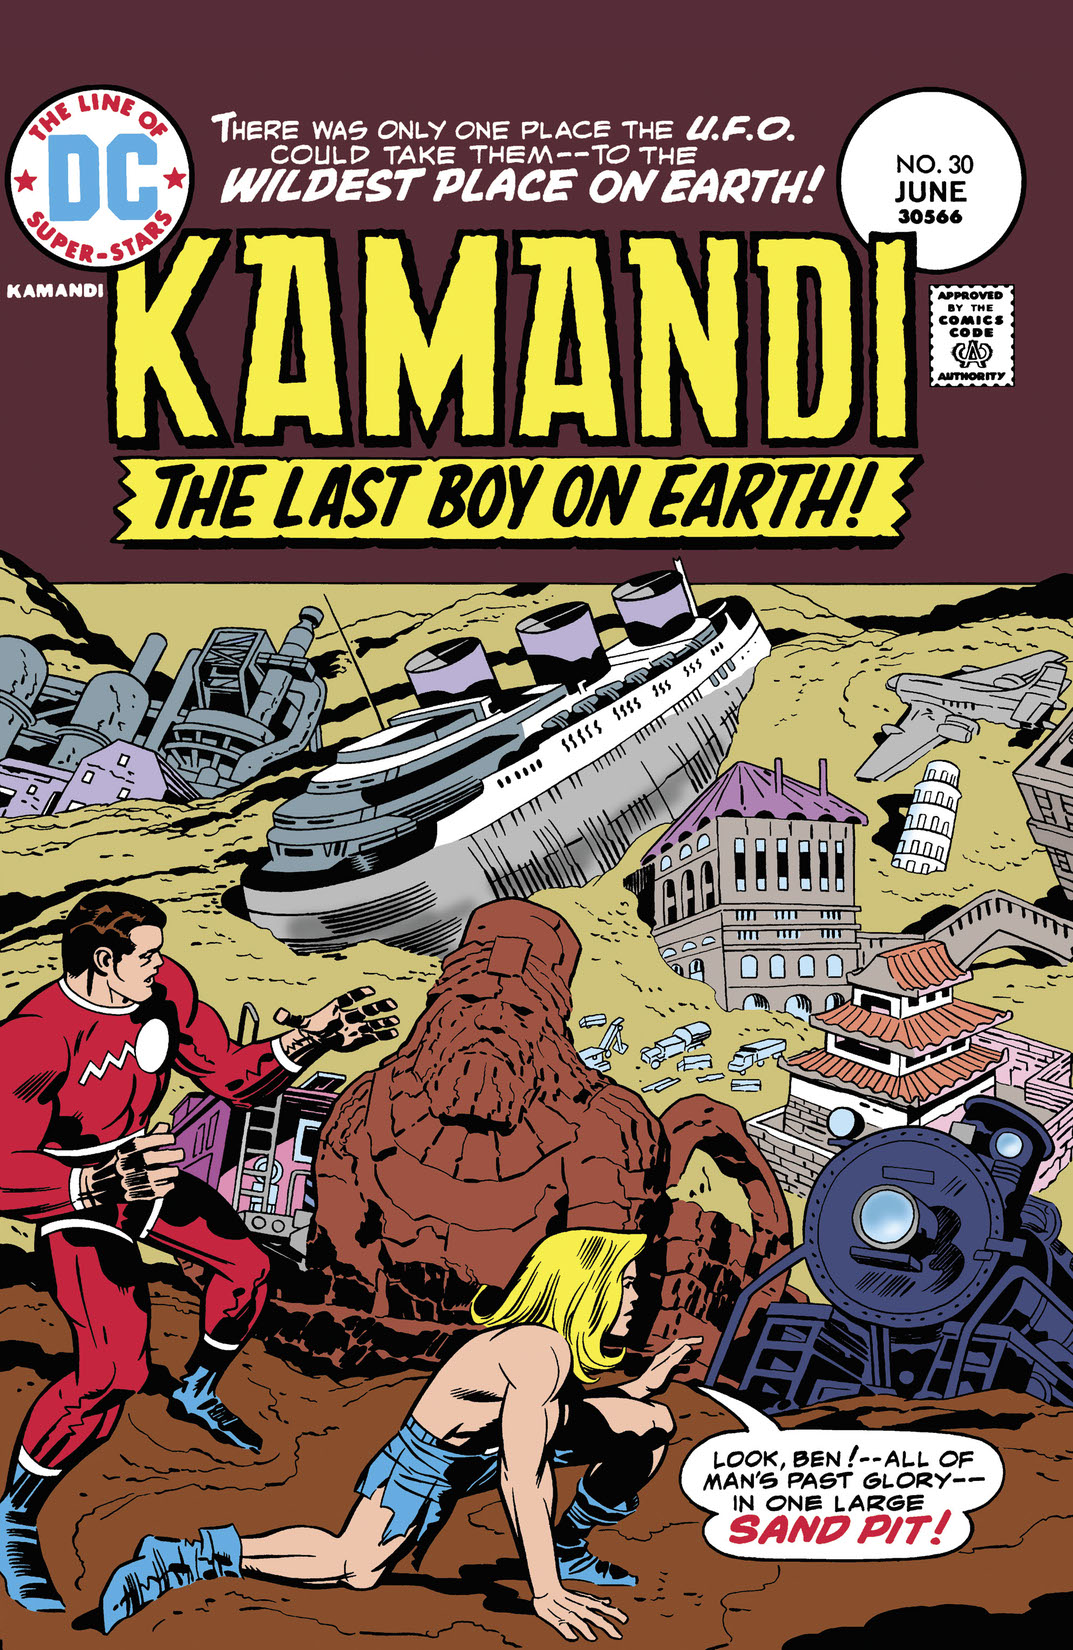 Kamandi: The Last Boy on Earth #30 preview images